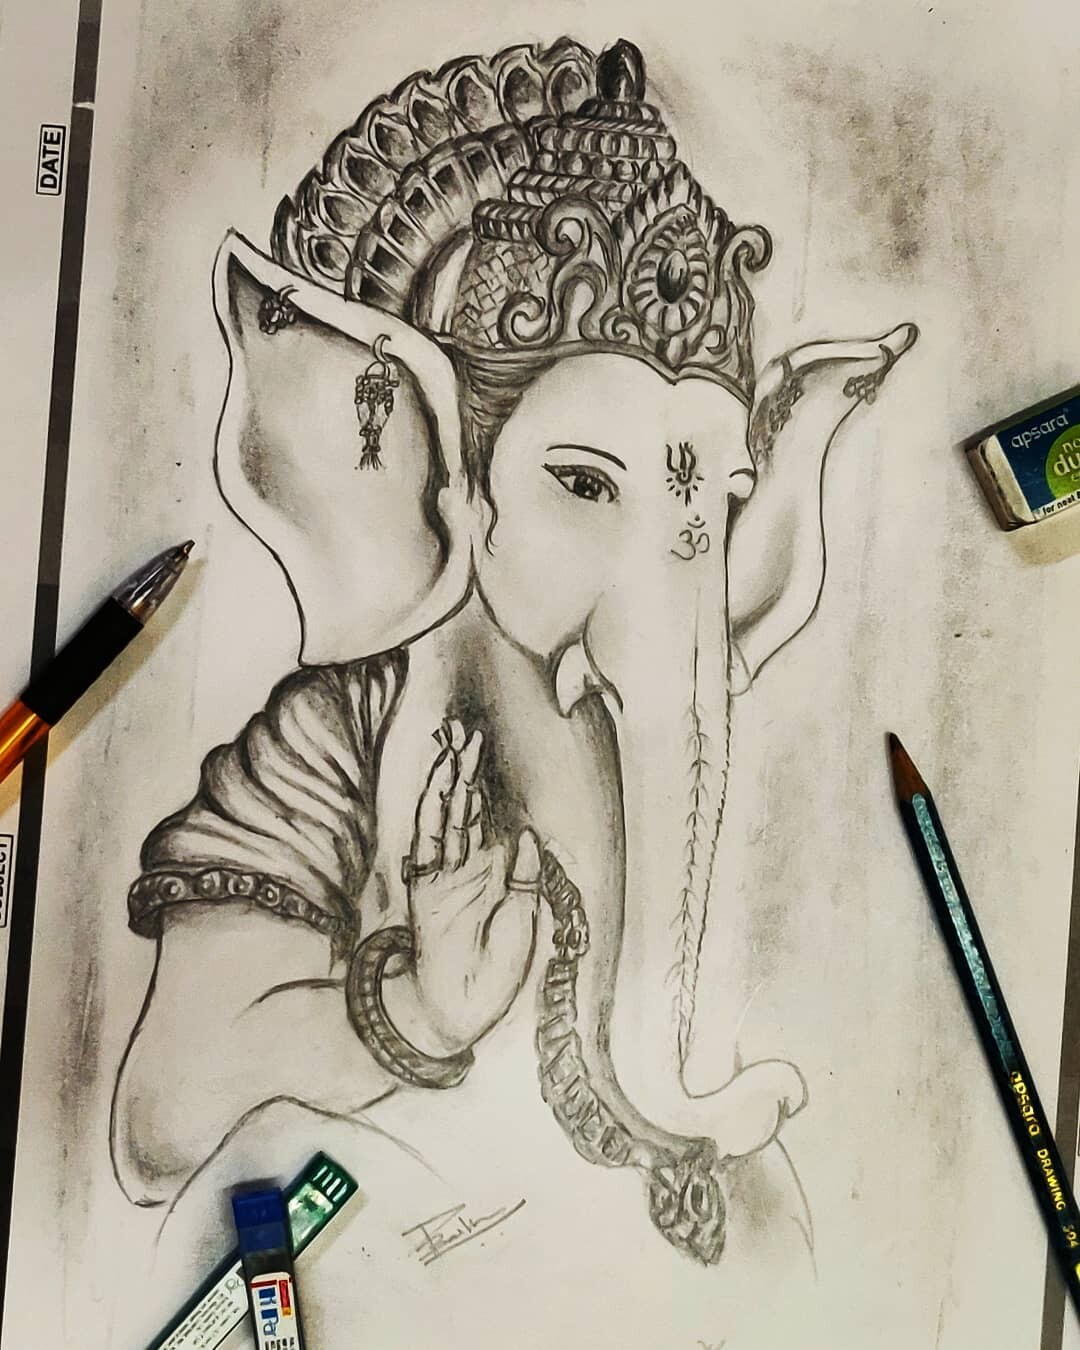 Ganesha drawing Cut Out Stock Images & Pictures - Alamy